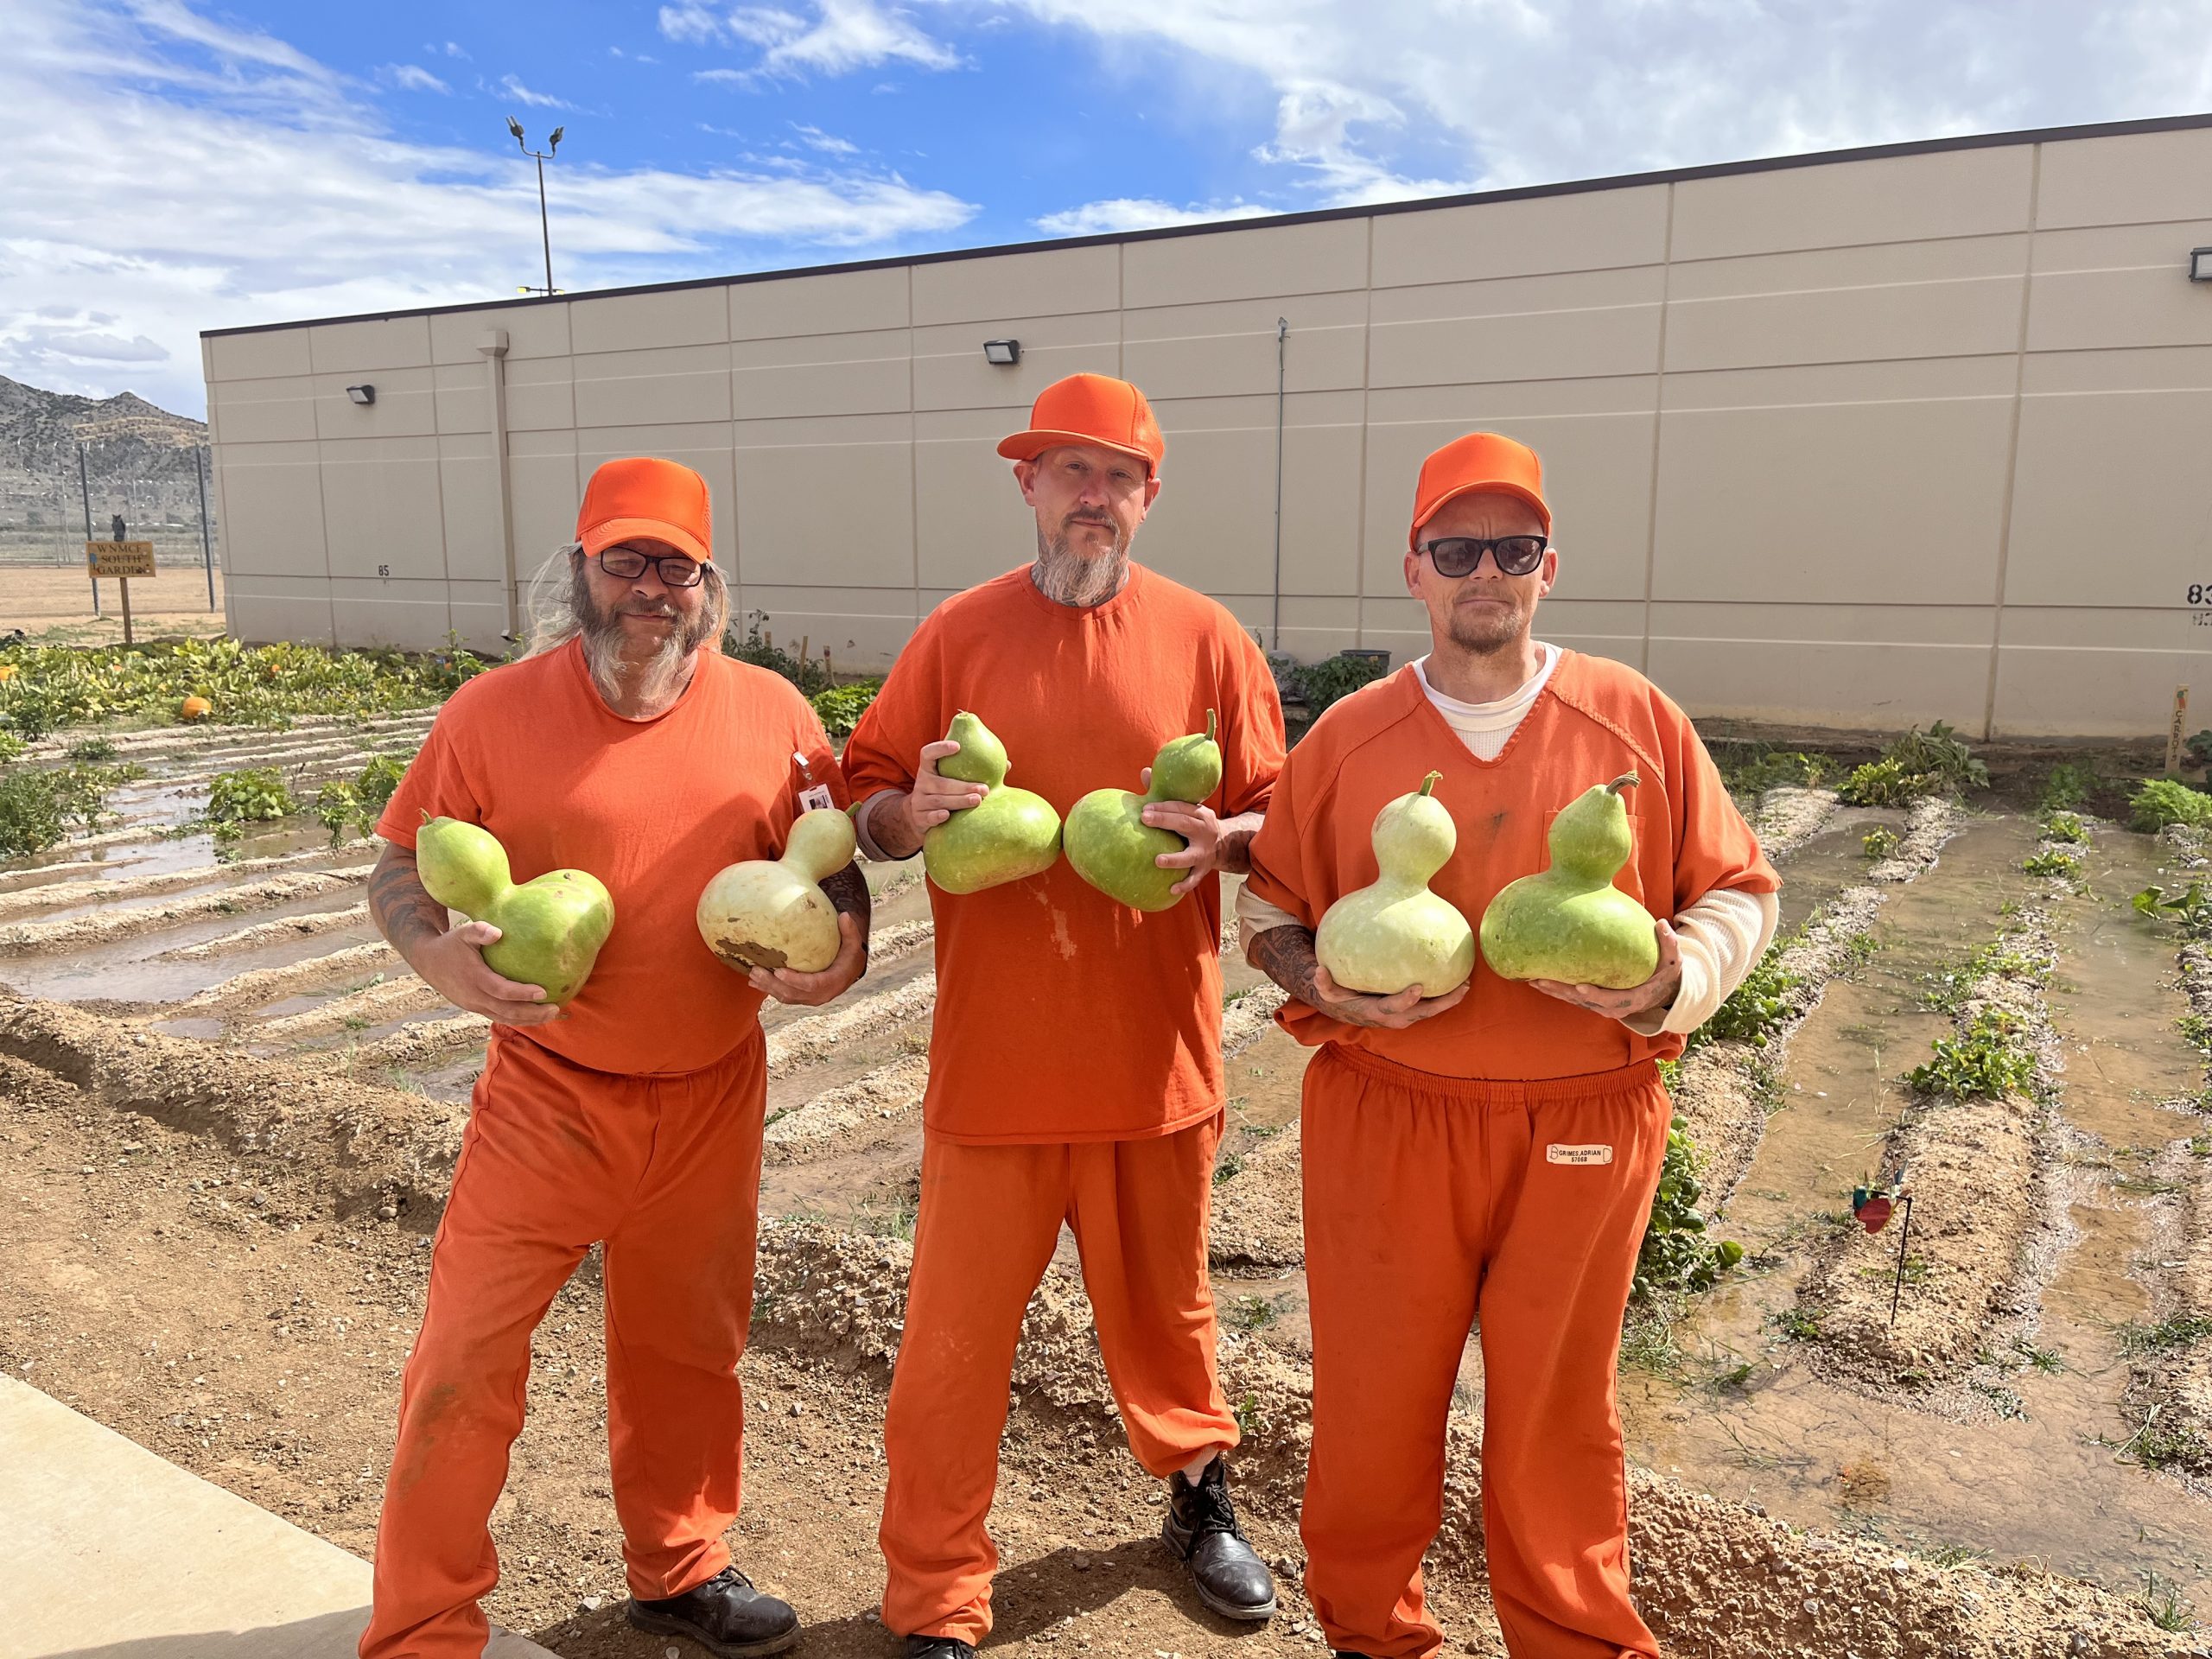 Inmates holding their harvest from the facility garden